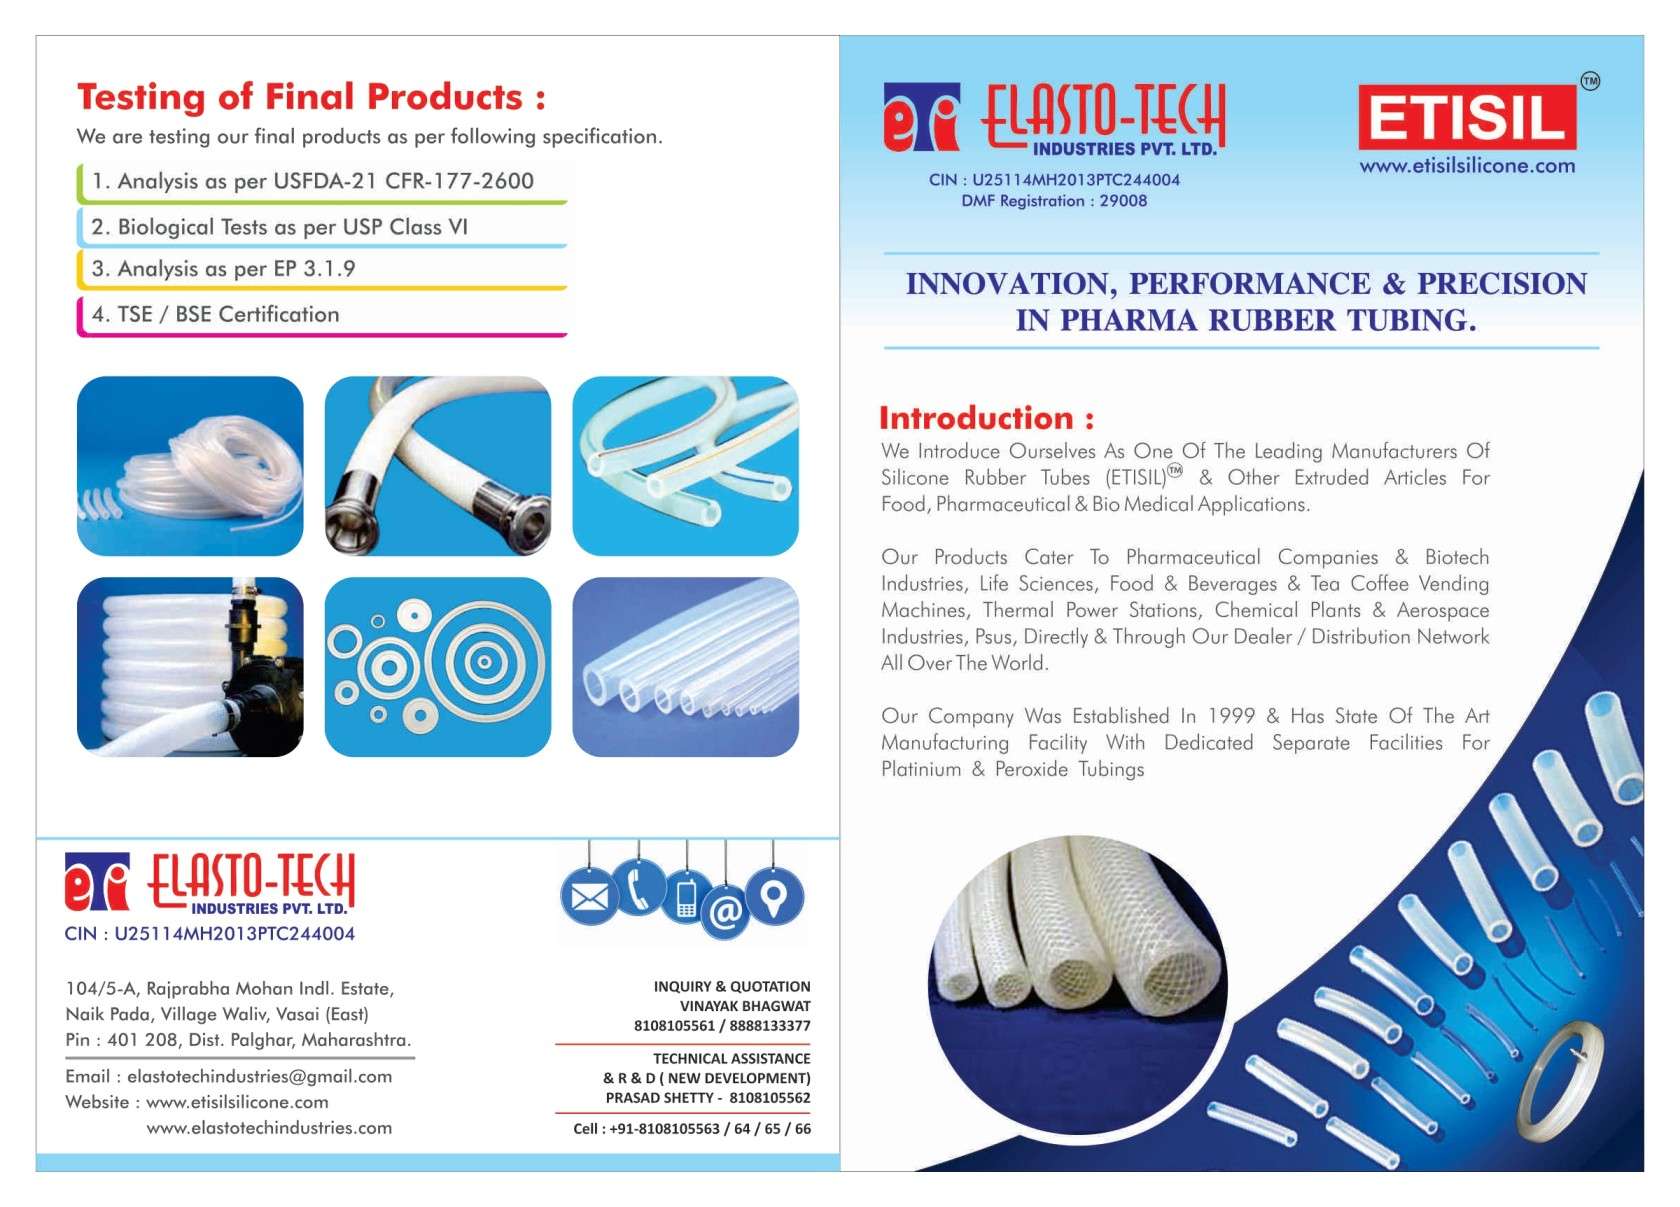 Silicone Rubber Tubes (ETISILR)